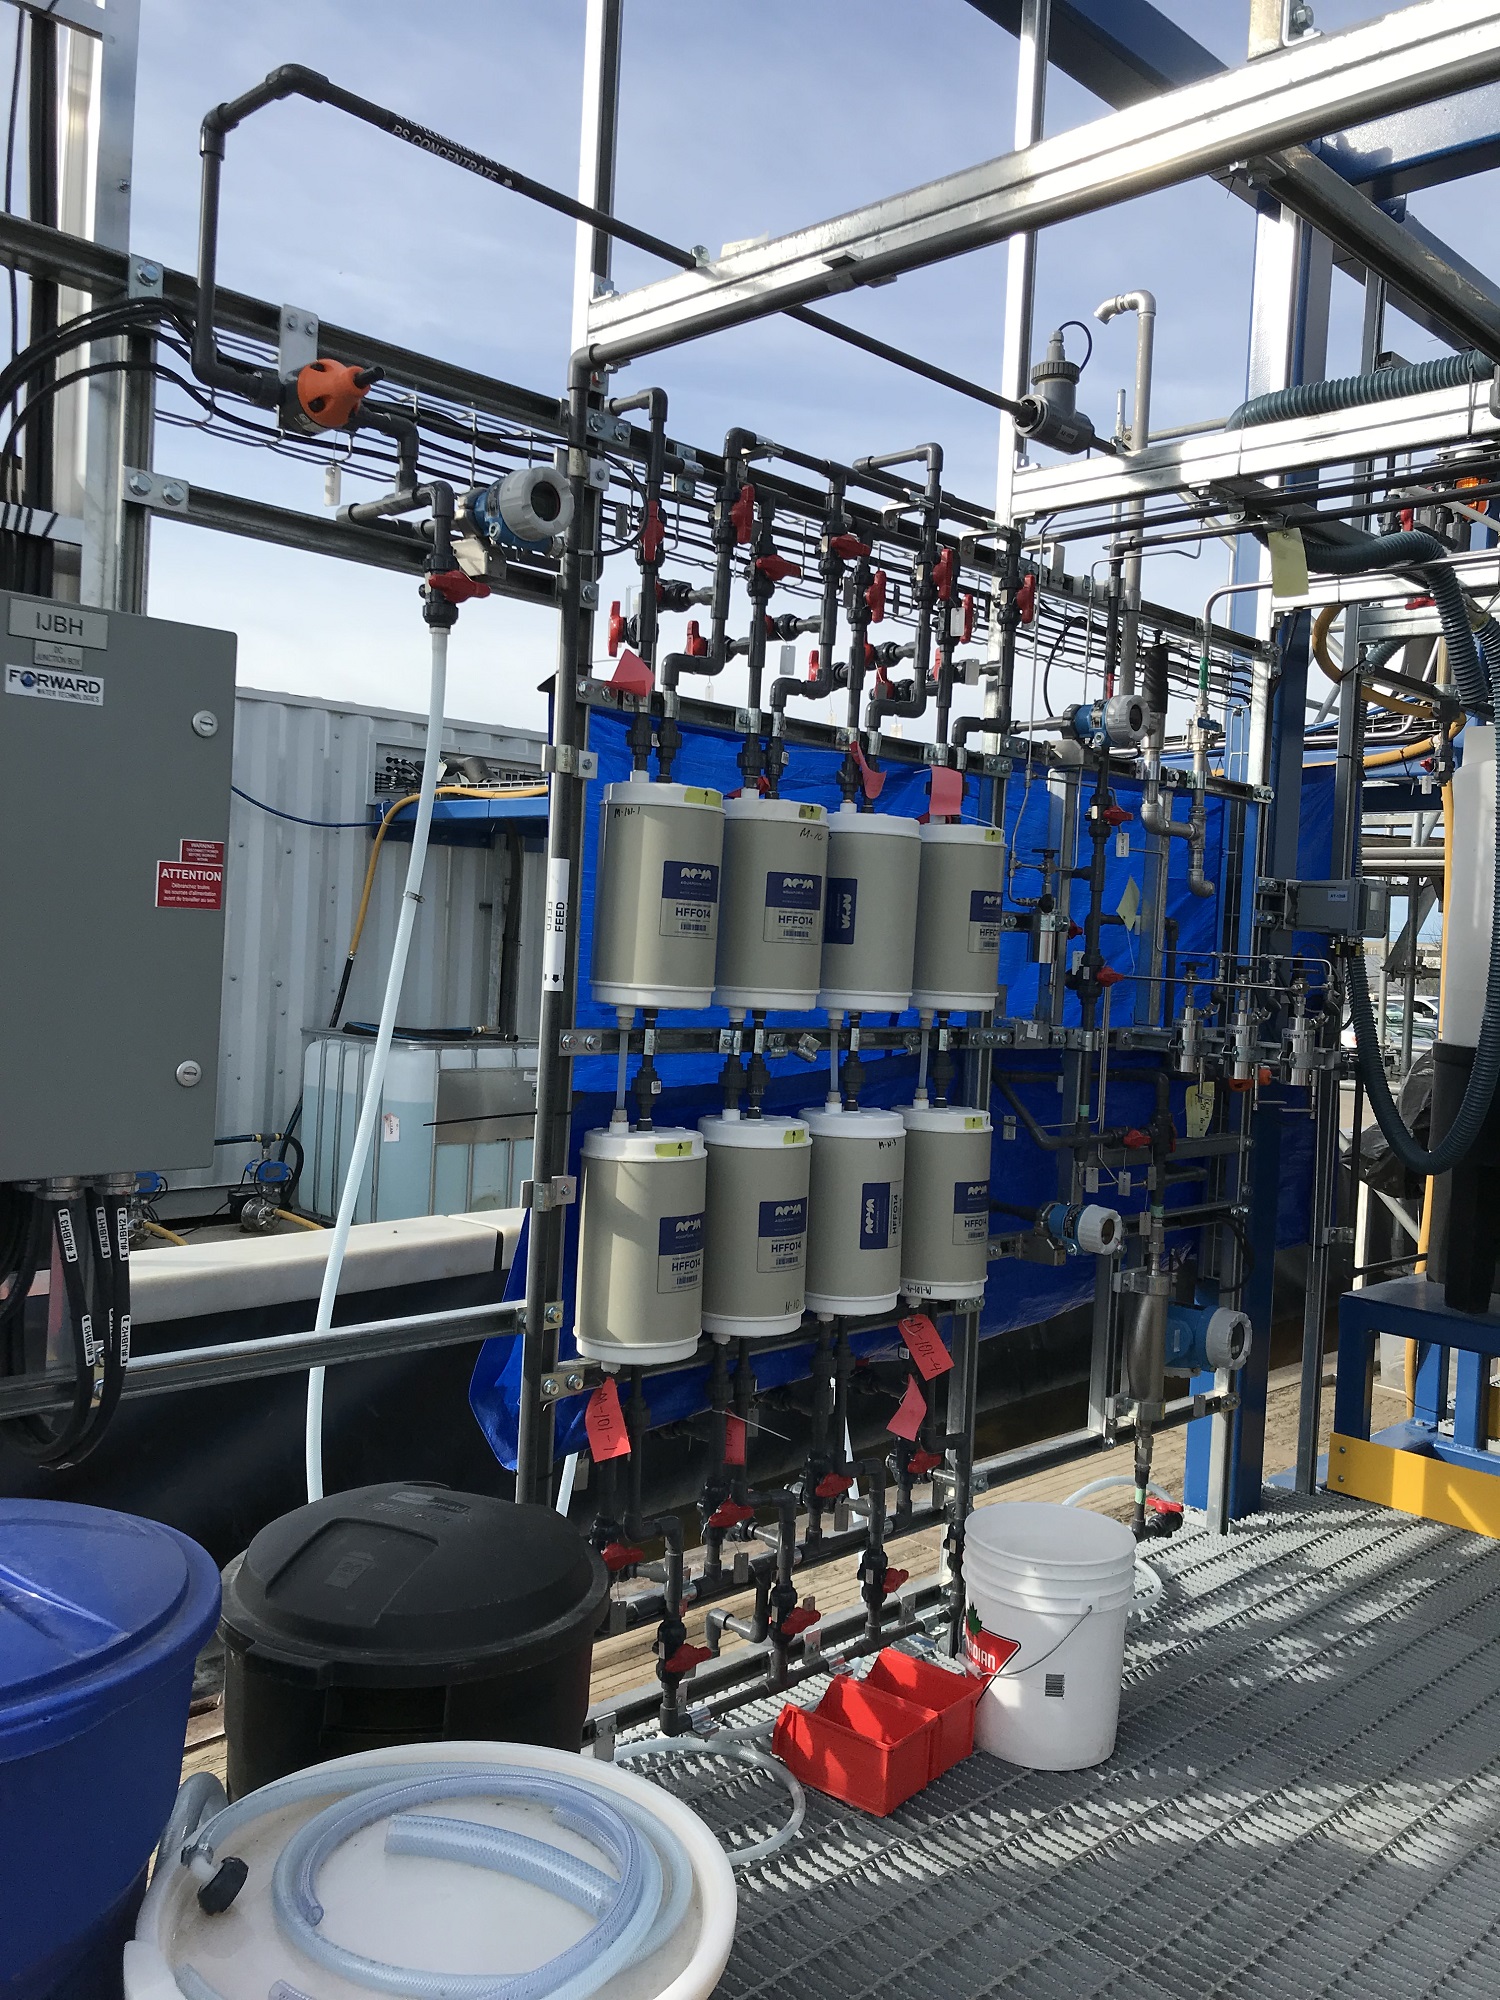 Forward Water Technologies’ industrial scale pilot plant uses Aquaporin Inside membranes and has shown that low cost, low energy consumption ZLD is possible.